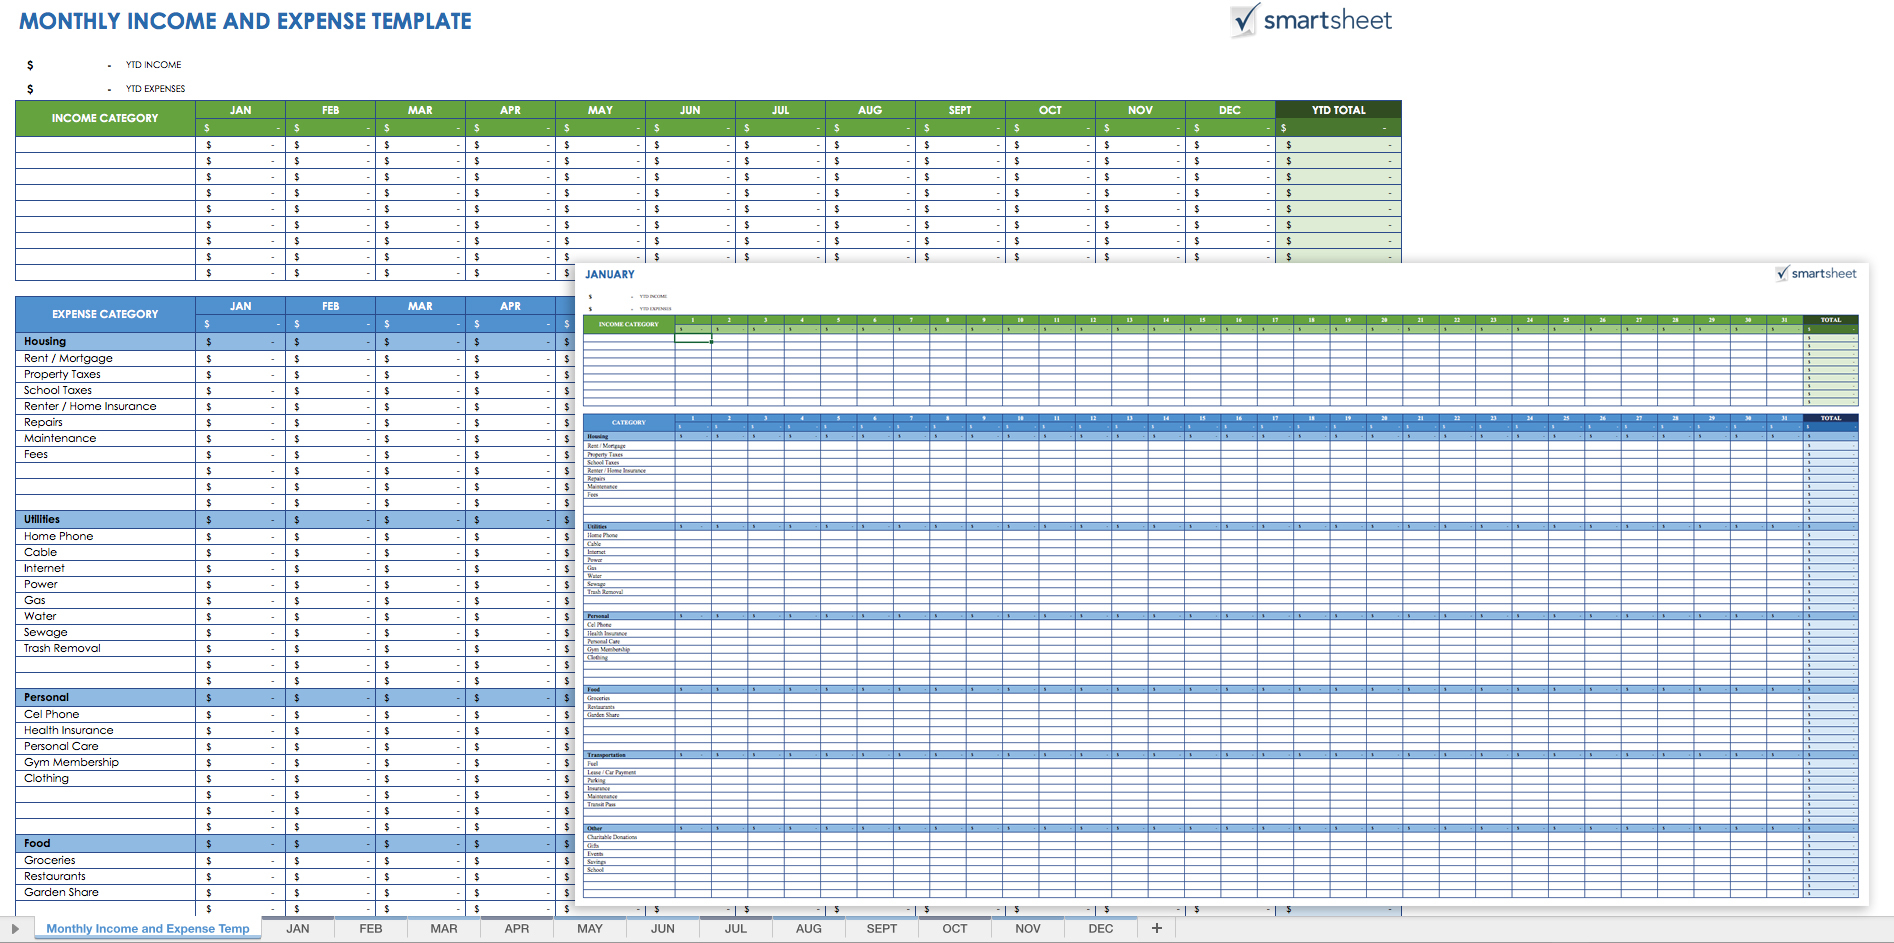 Free Expense Report Templates Smartsheet With Sample Spreadsheet For Business Expenses